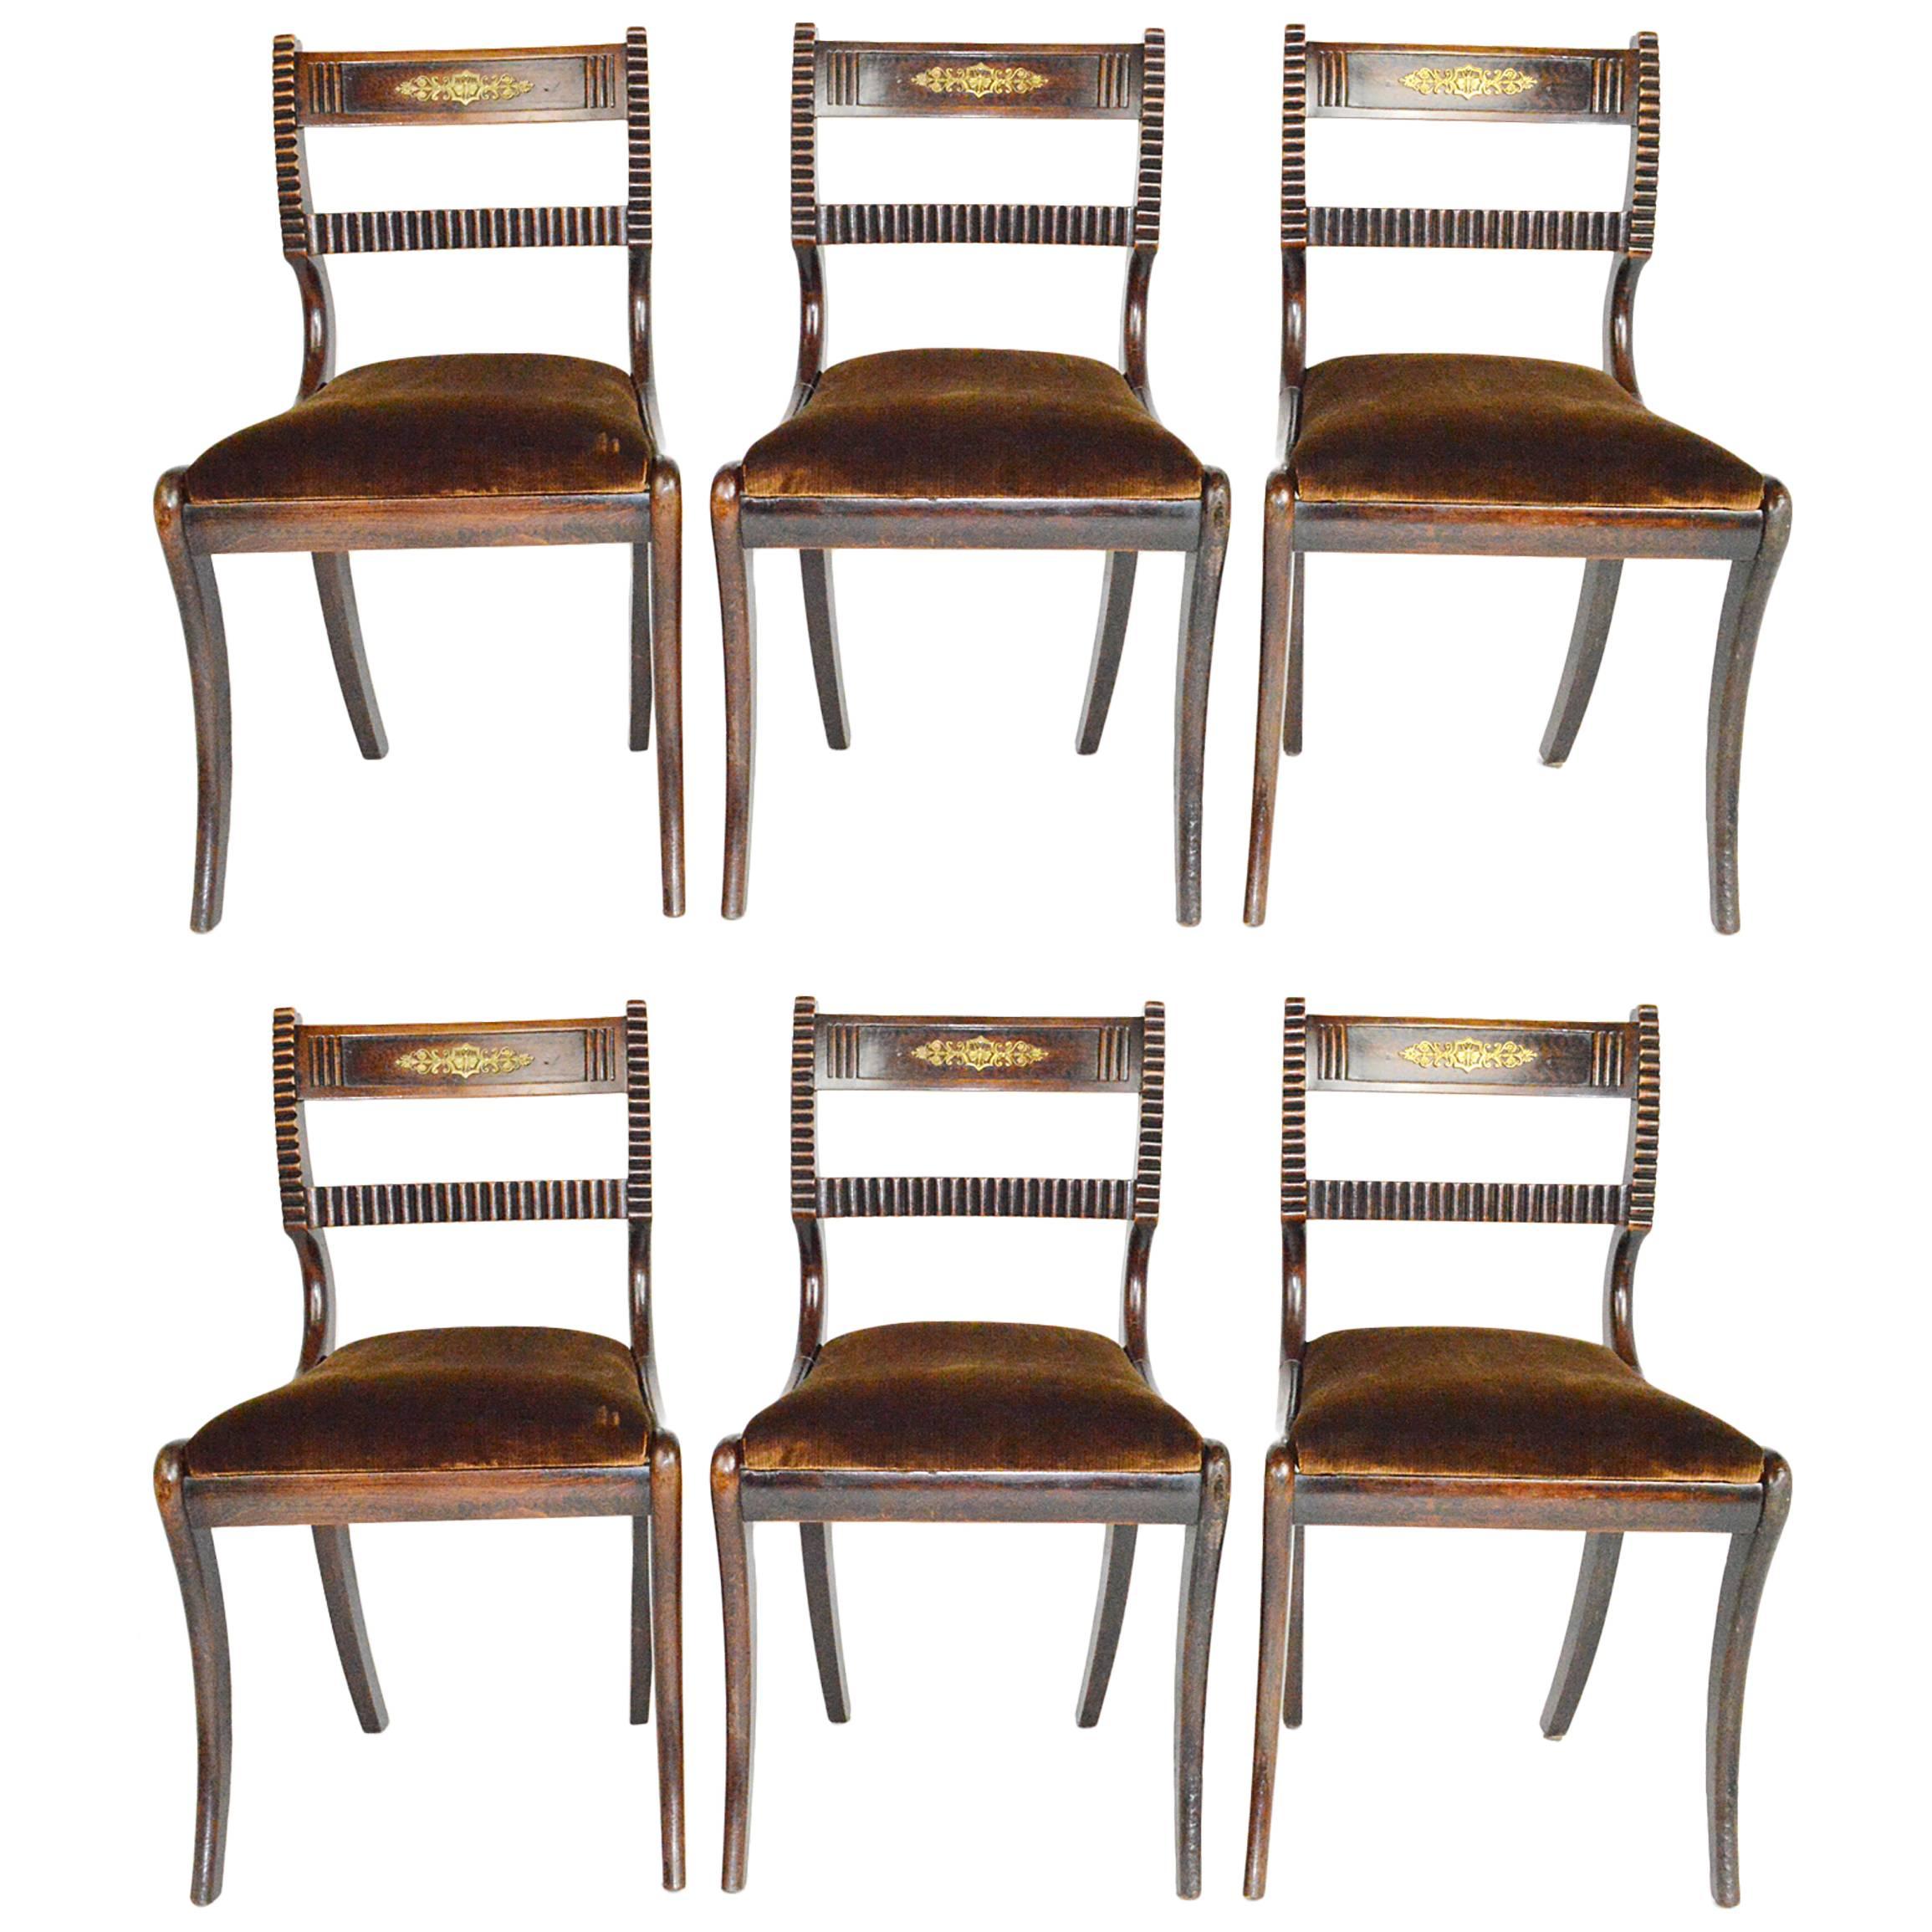 Set of Six English Regency Style Side Chairs